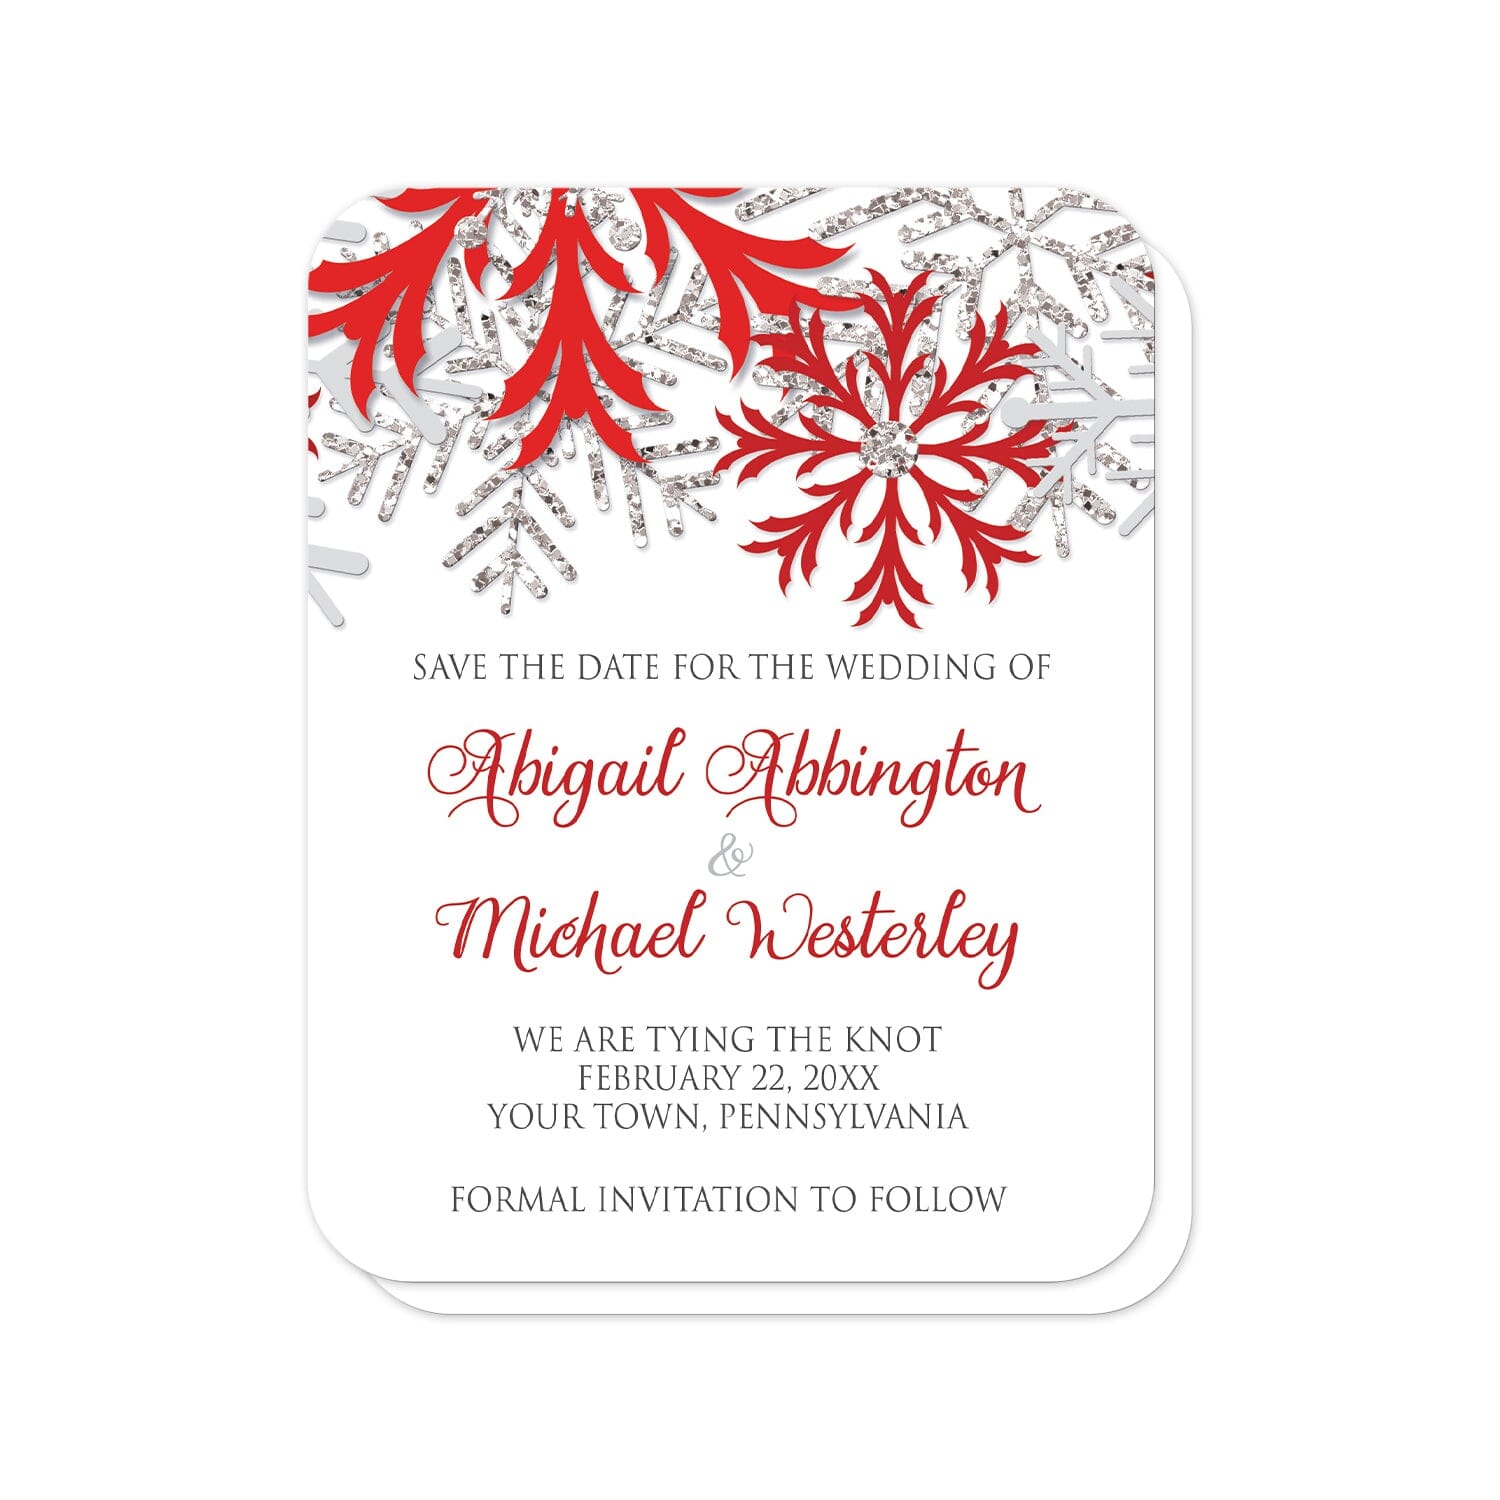 Winter Red Silver Snowflake Save the Date Cards (with rounded corners) at Artistically Invited. Beautiful winter red silver snowflake save the date cards designed with red, darker red, silver-colored glitter-illustrated, and light gray snowflakes along the top over a white background. Your personalized wedding date details are custom printed in red and gray below the pretty snowflakes.